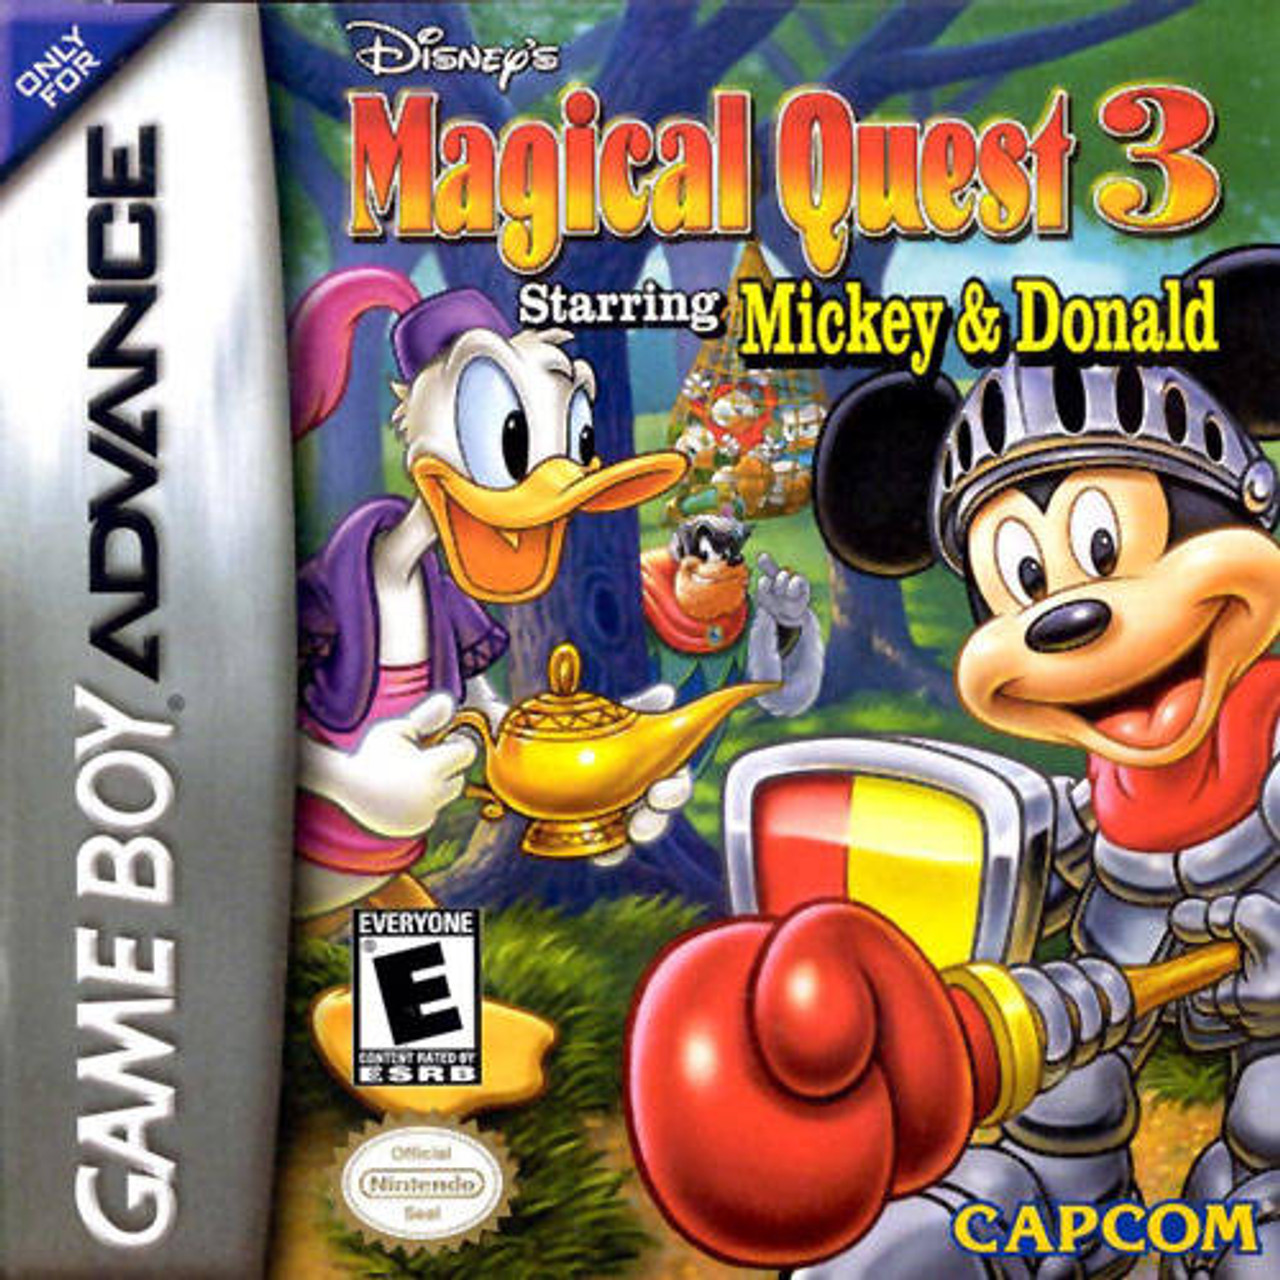 Magical Quest 3: Starring Mickey and Donald - Game Boy Advance